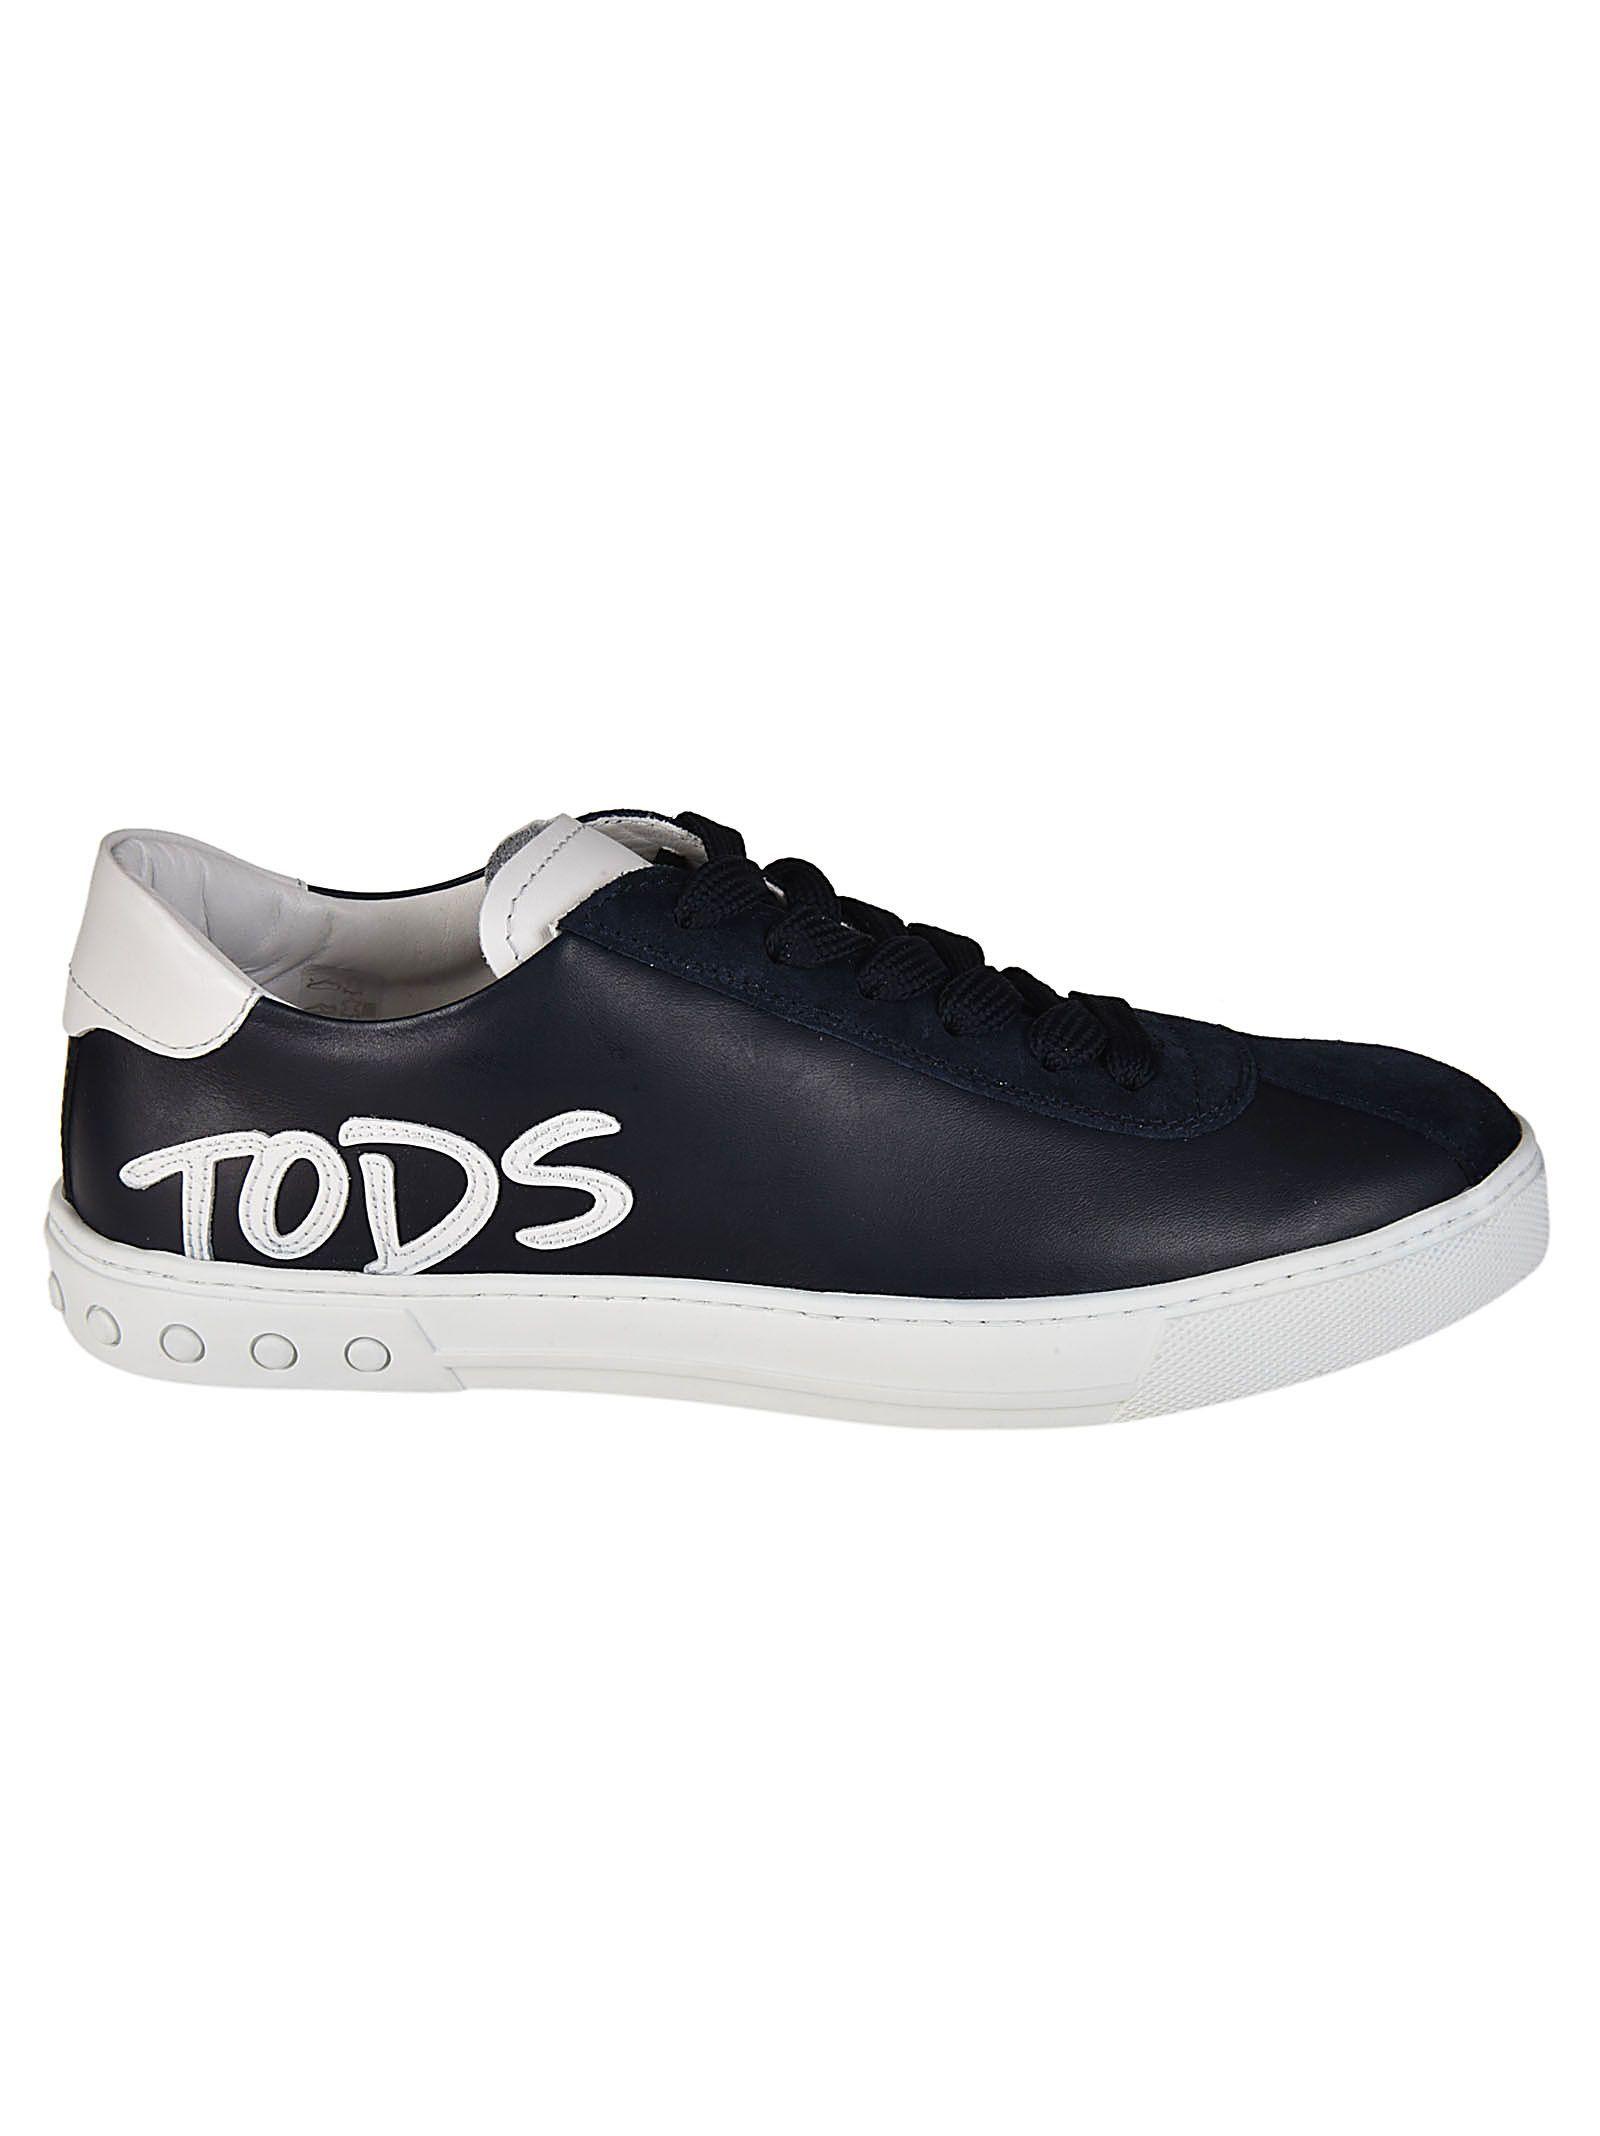 Tod's Logo - TOD'S LOGO APPLIQUE LACE-UP SNEAKERS. #tods #shoes # | Tod'S Men ...